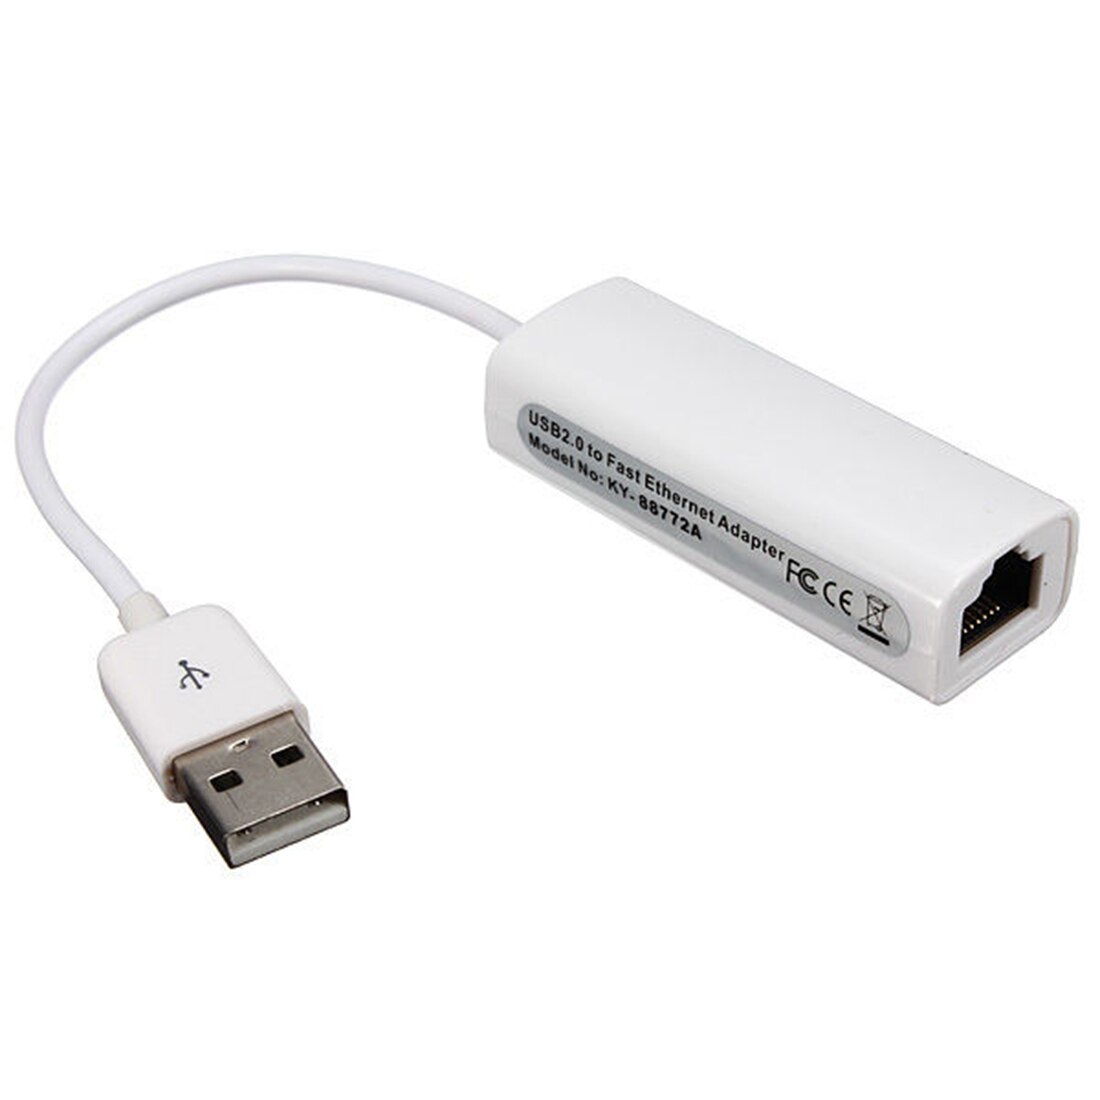 Top Deals USB 2.0 to RJ45 LAN Ethernet Network Adapter For Apple Mac MacBook Air Laptop PC